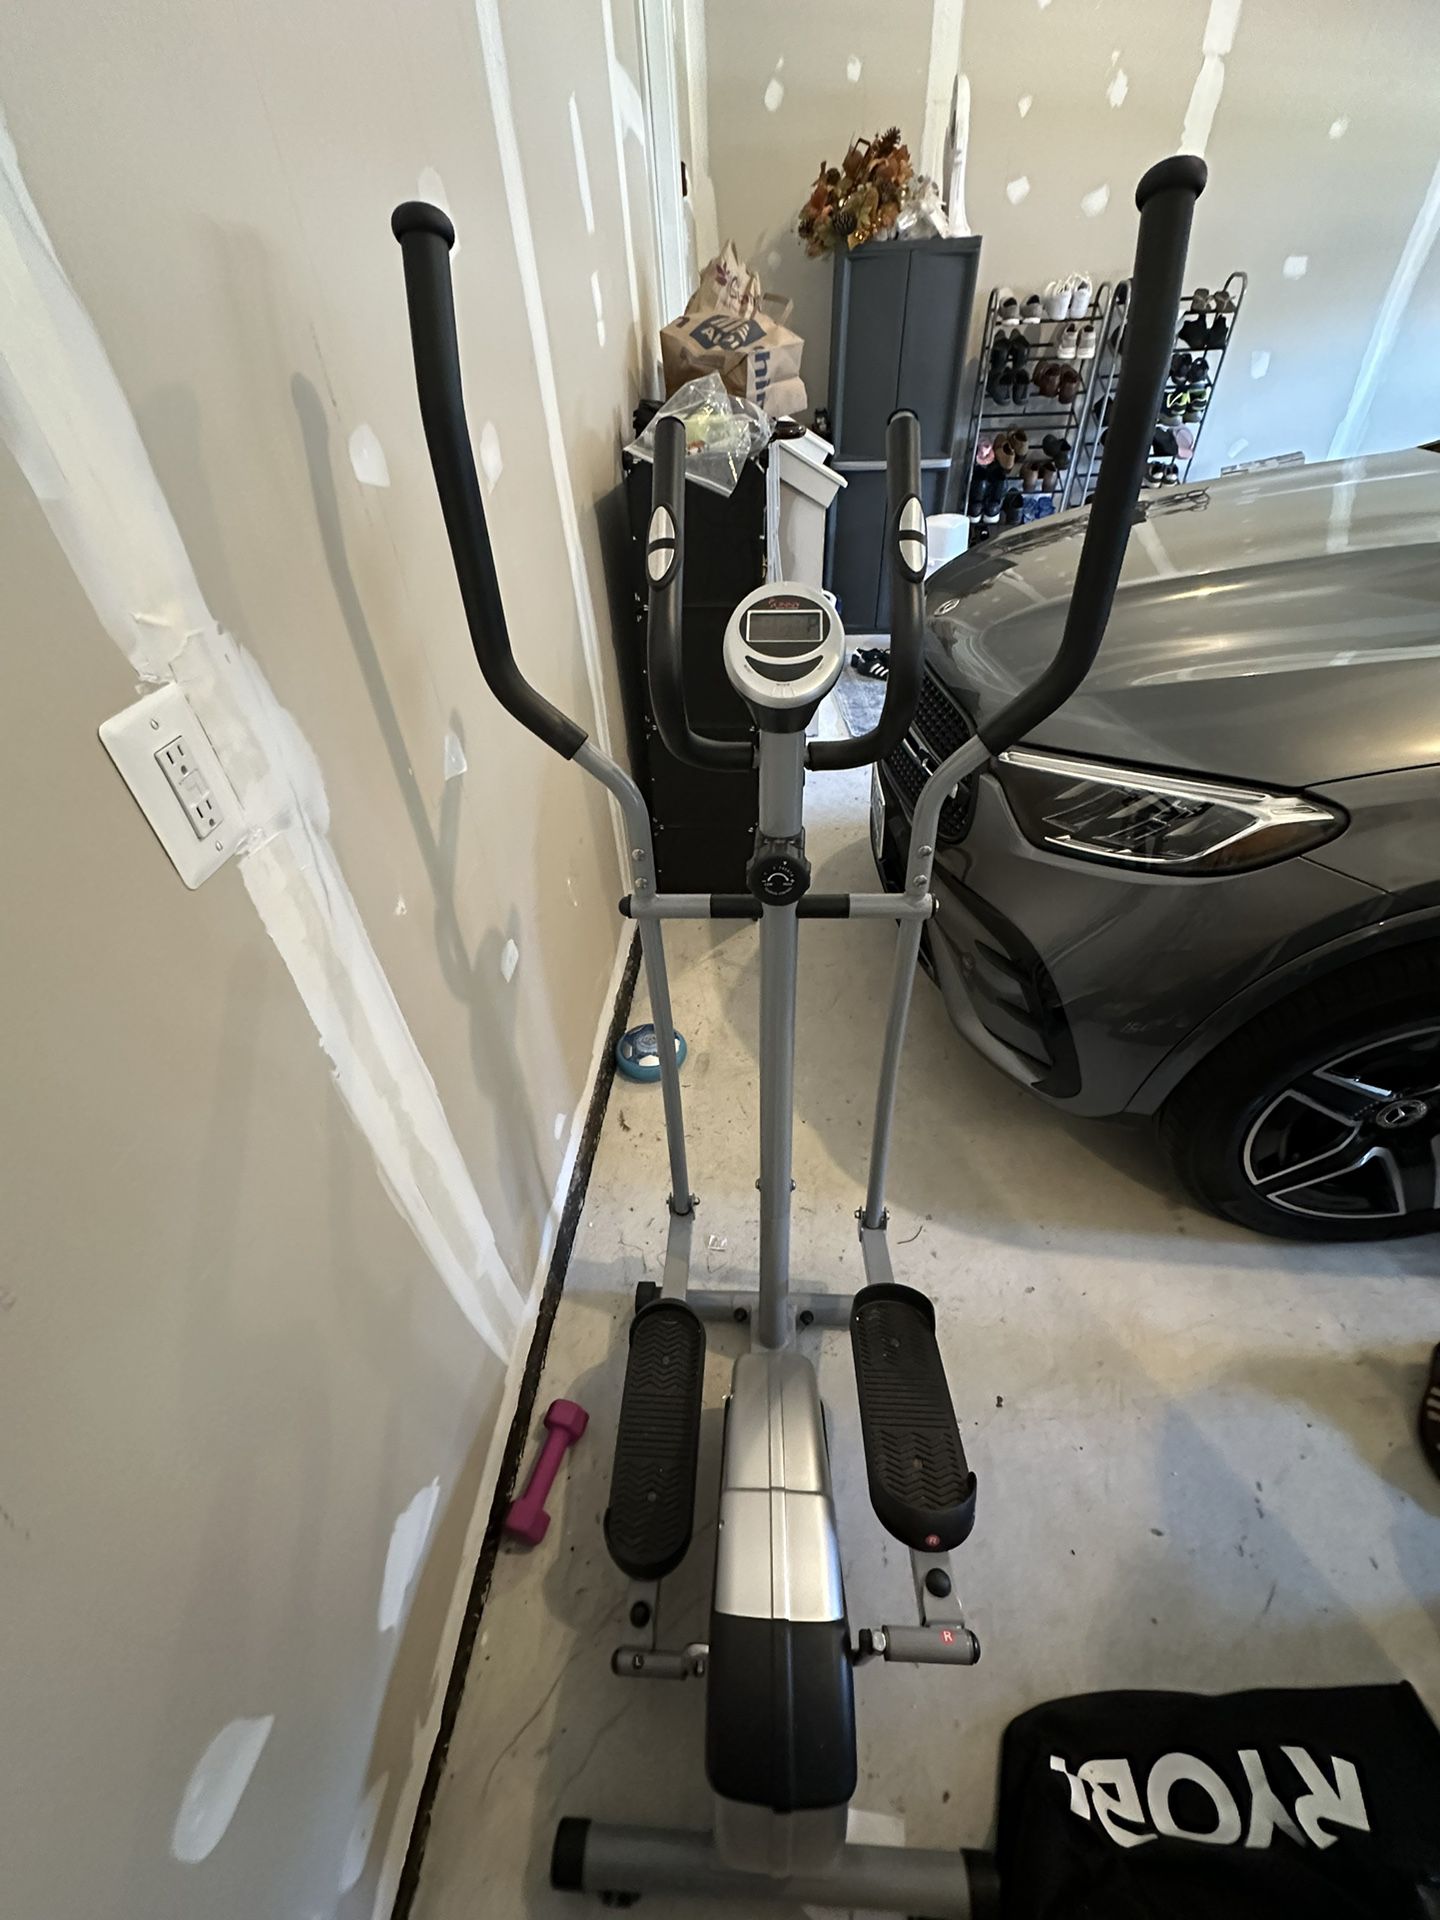 Mini Elliptical No Connection Required